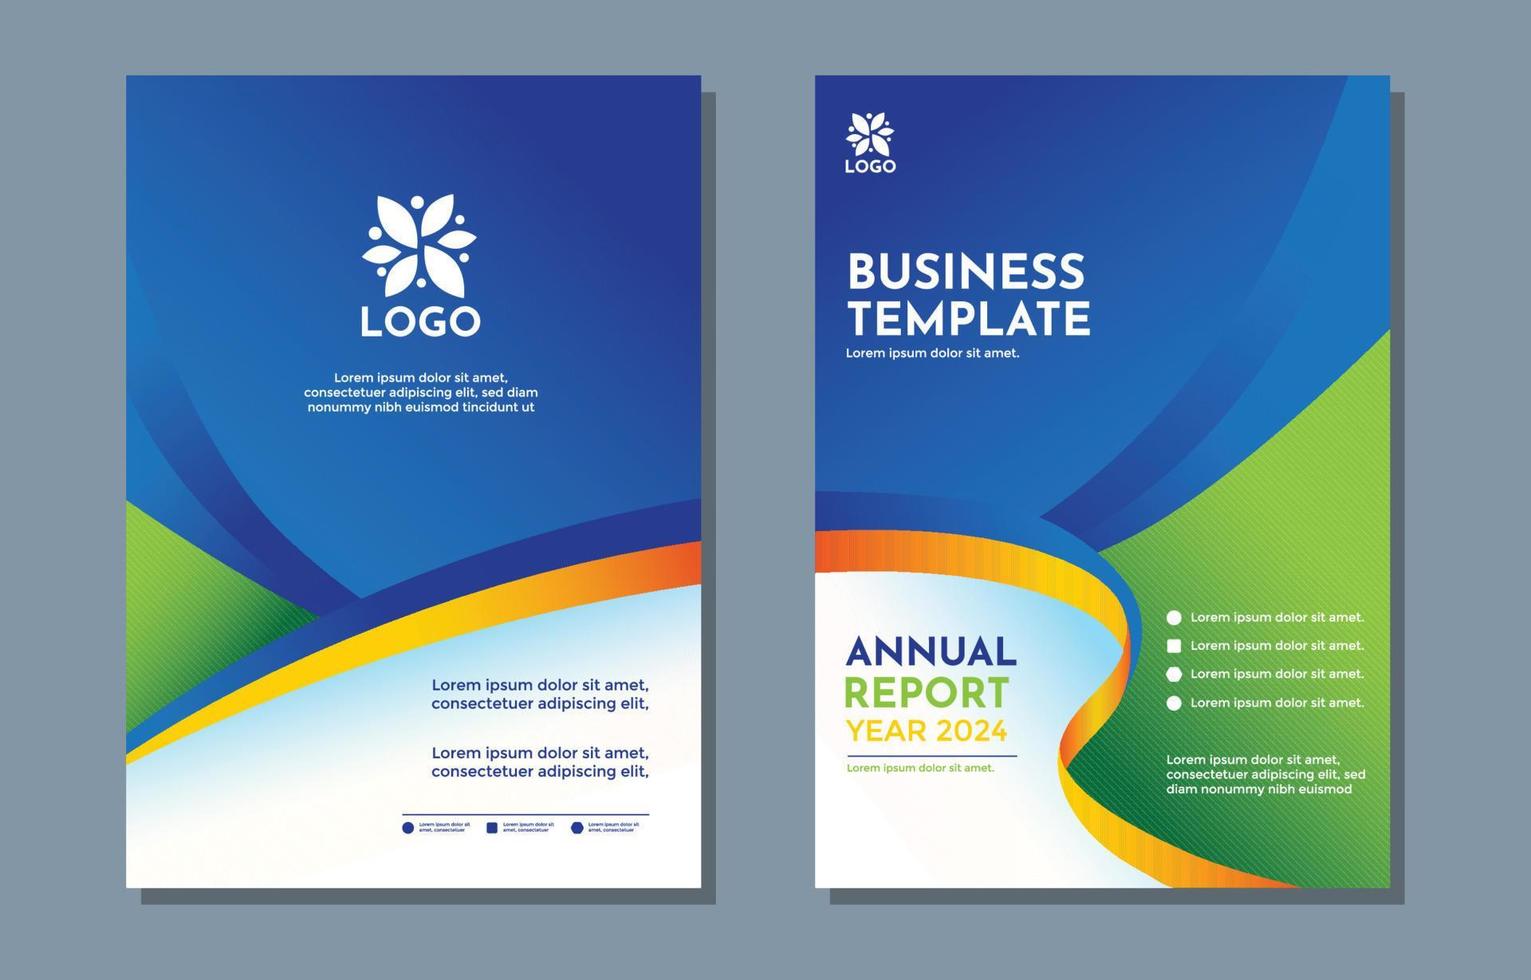 Annual Report Book Cover Template vector